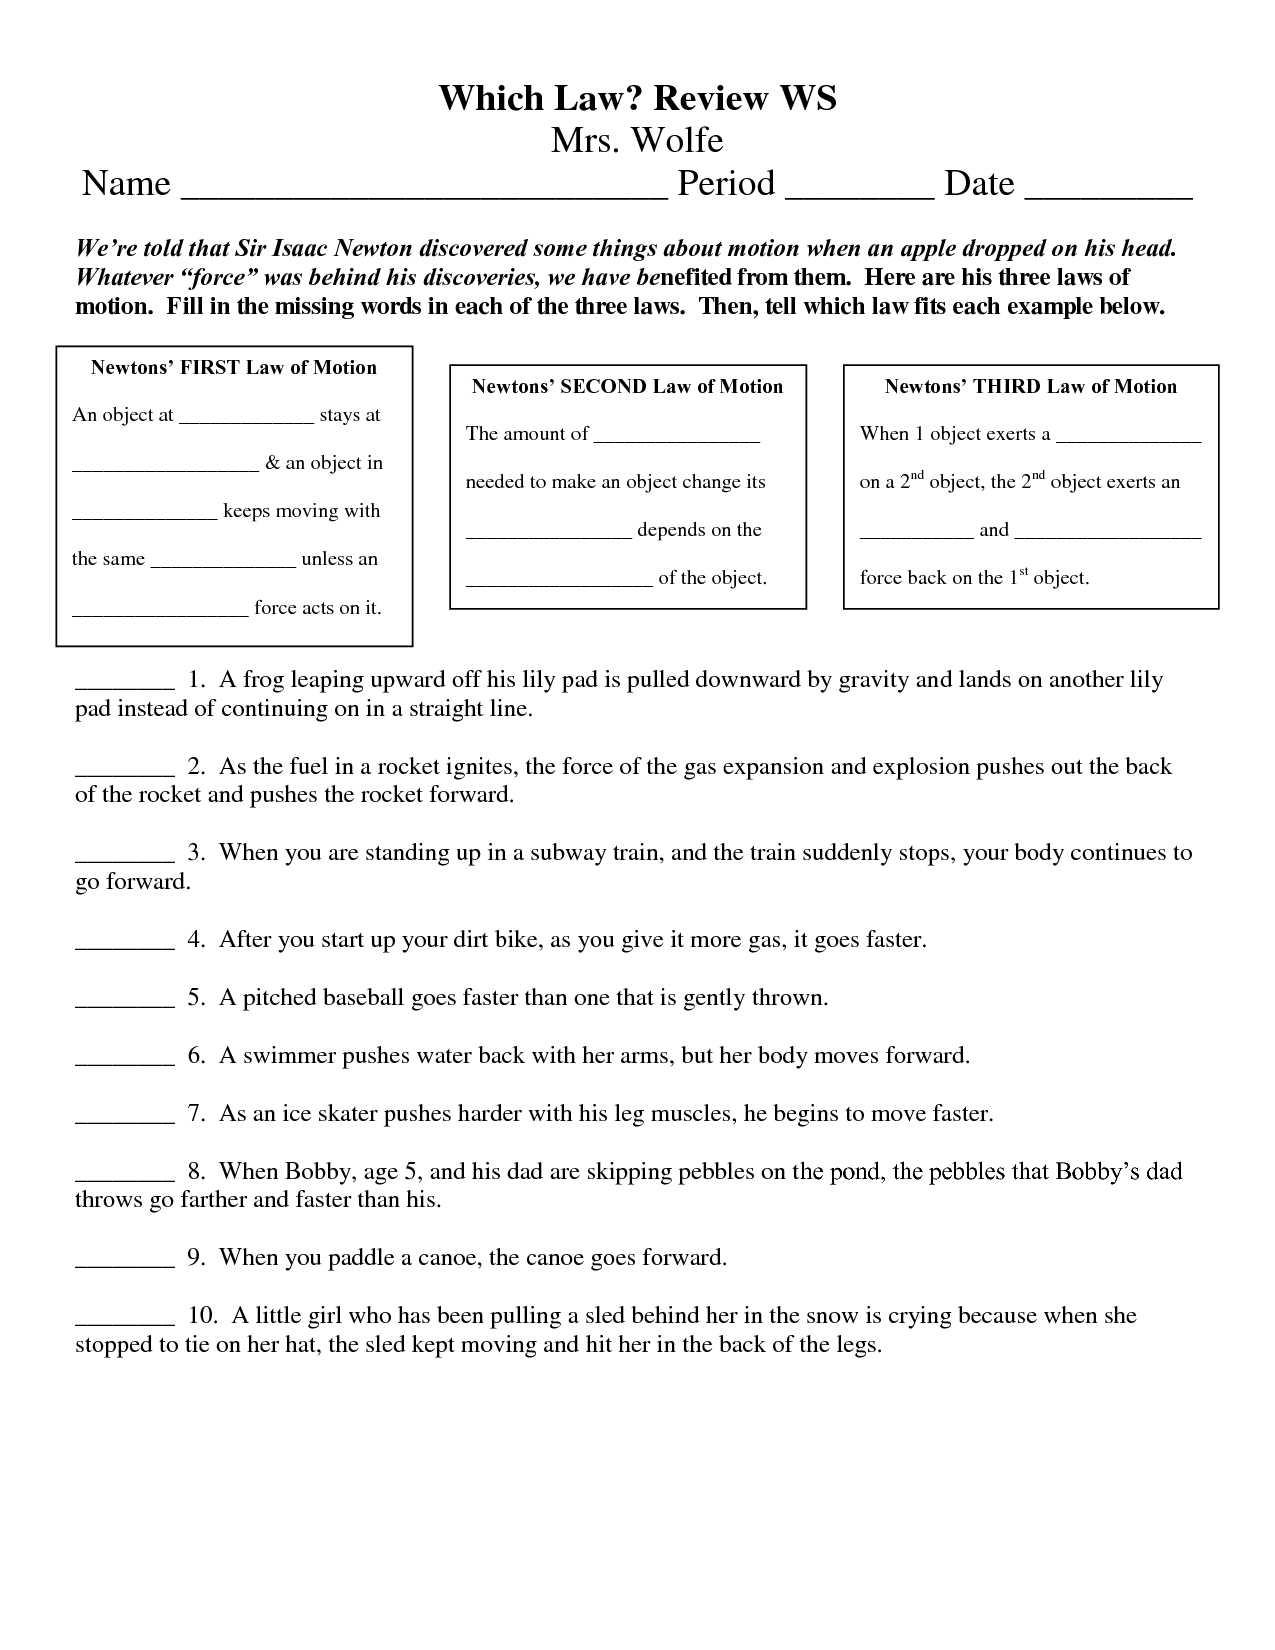 Types Of Chemical Reactions Worksheet Answers together with 3 Laws Of Motion Worksheets